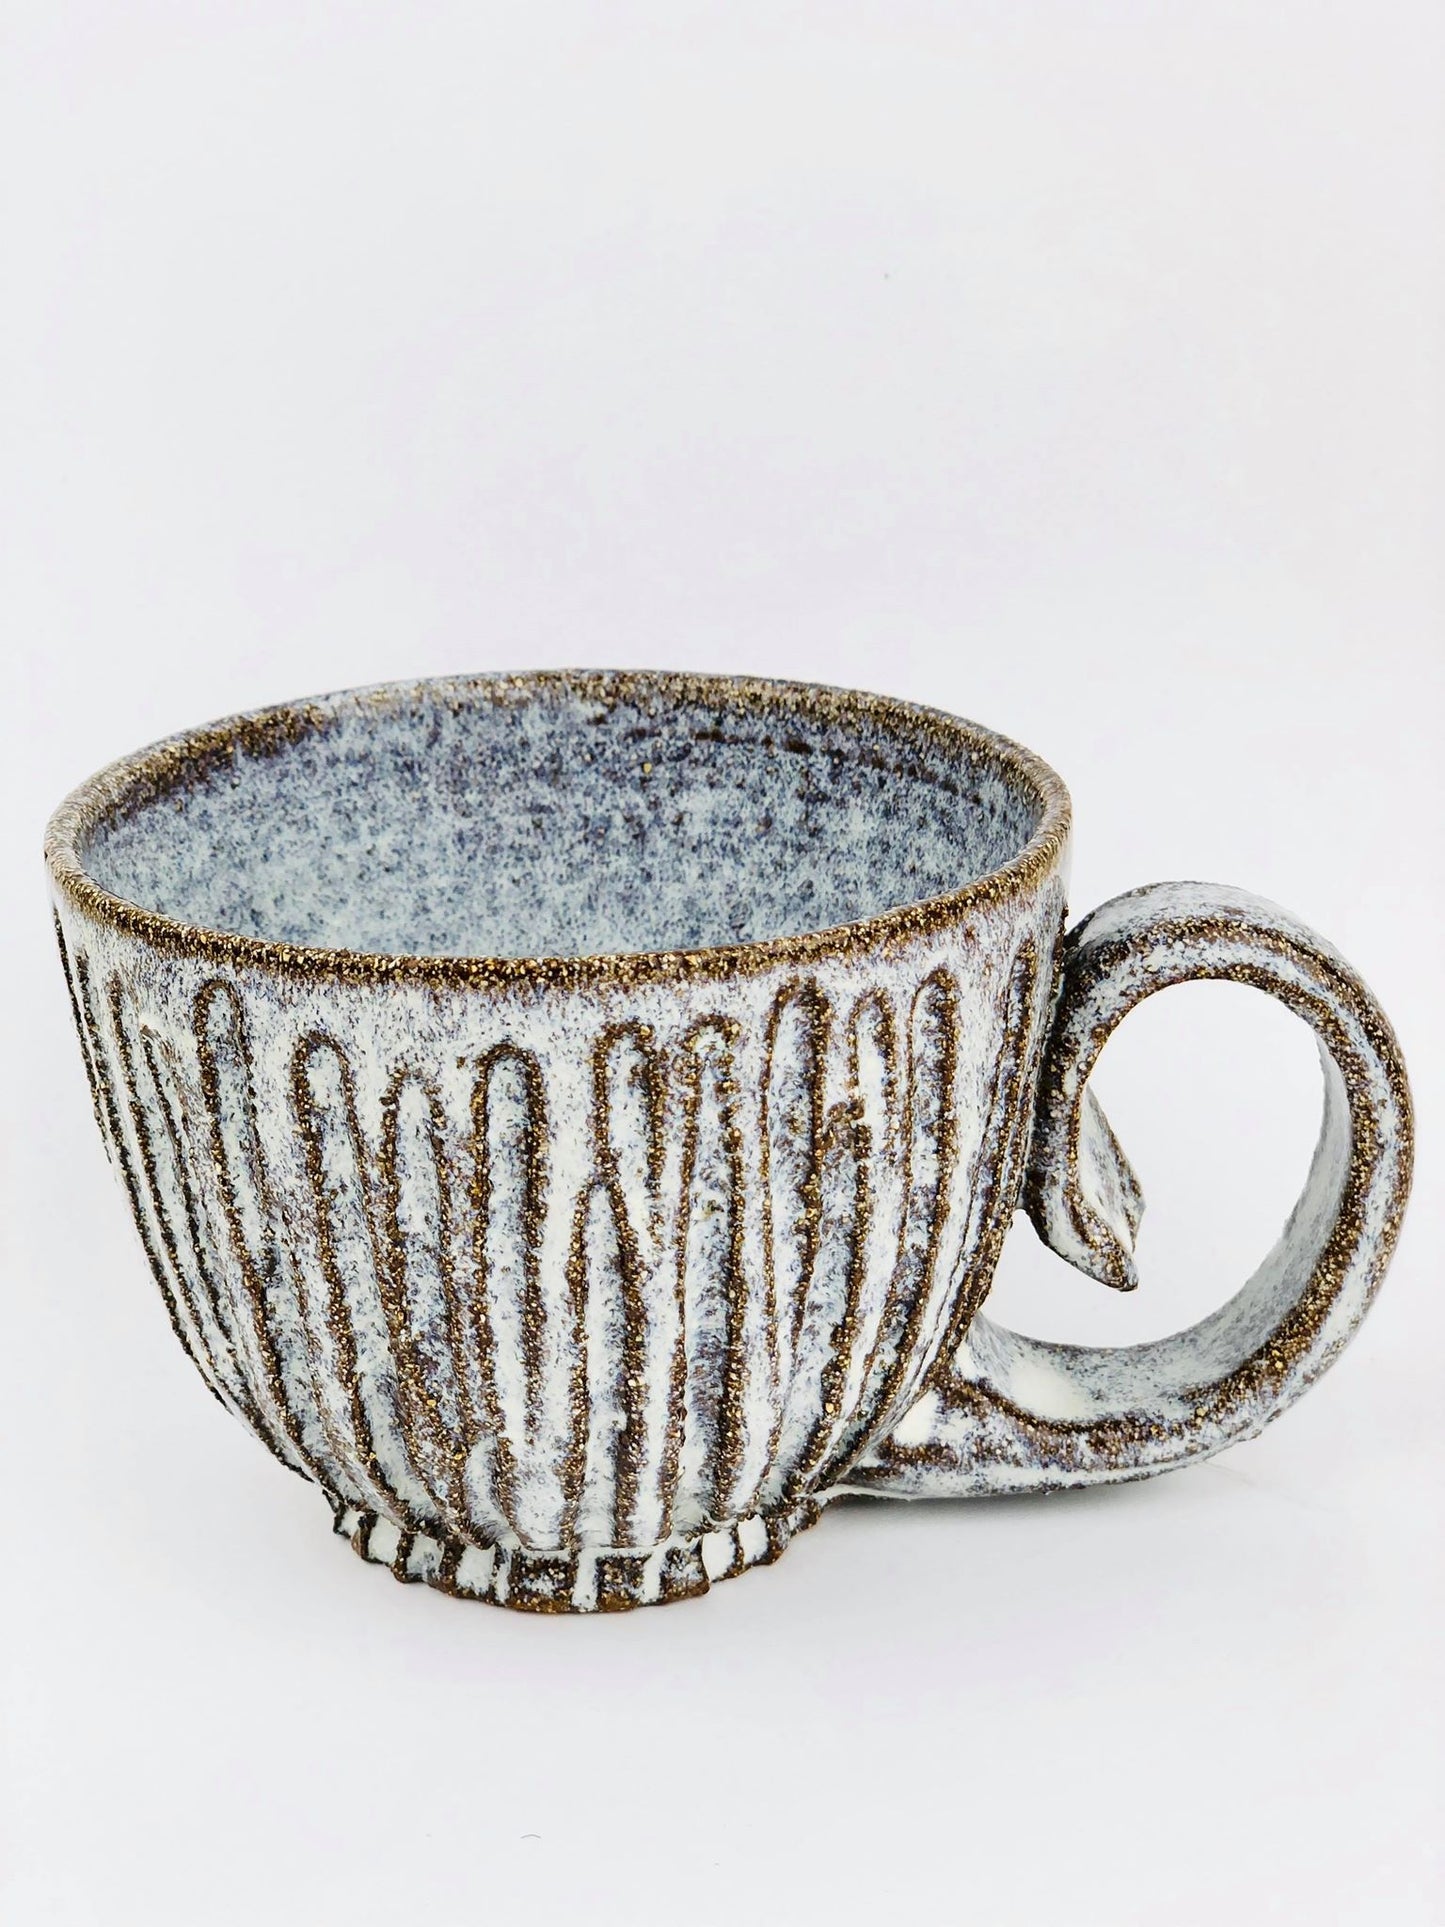 Poppy Seed Head Cup and Saucer  ✨ 50% off